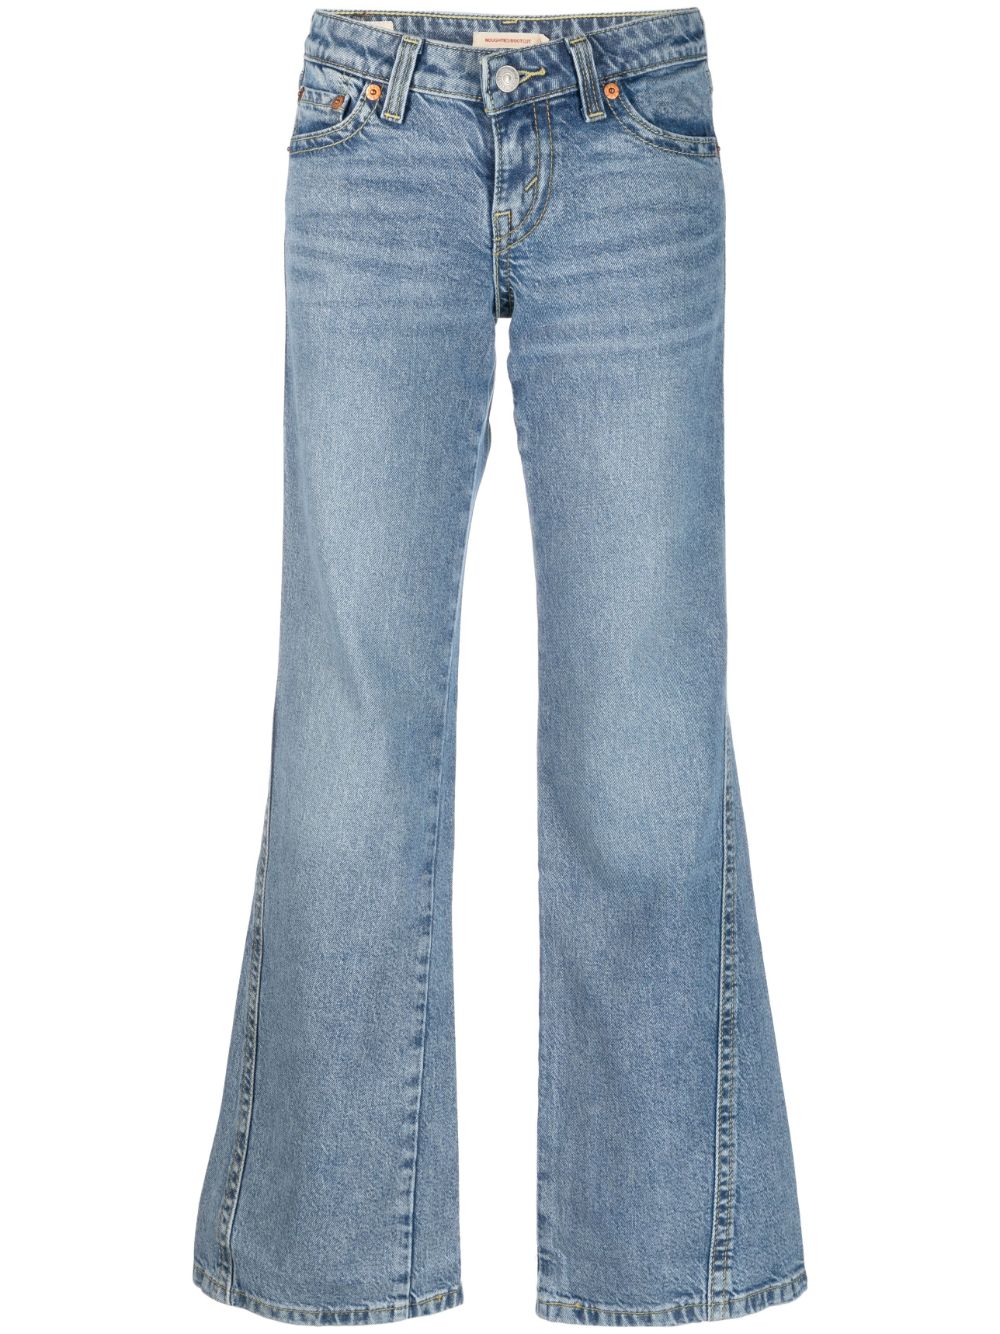 LEVI'S MID-RISE BOOTCUT JEANS